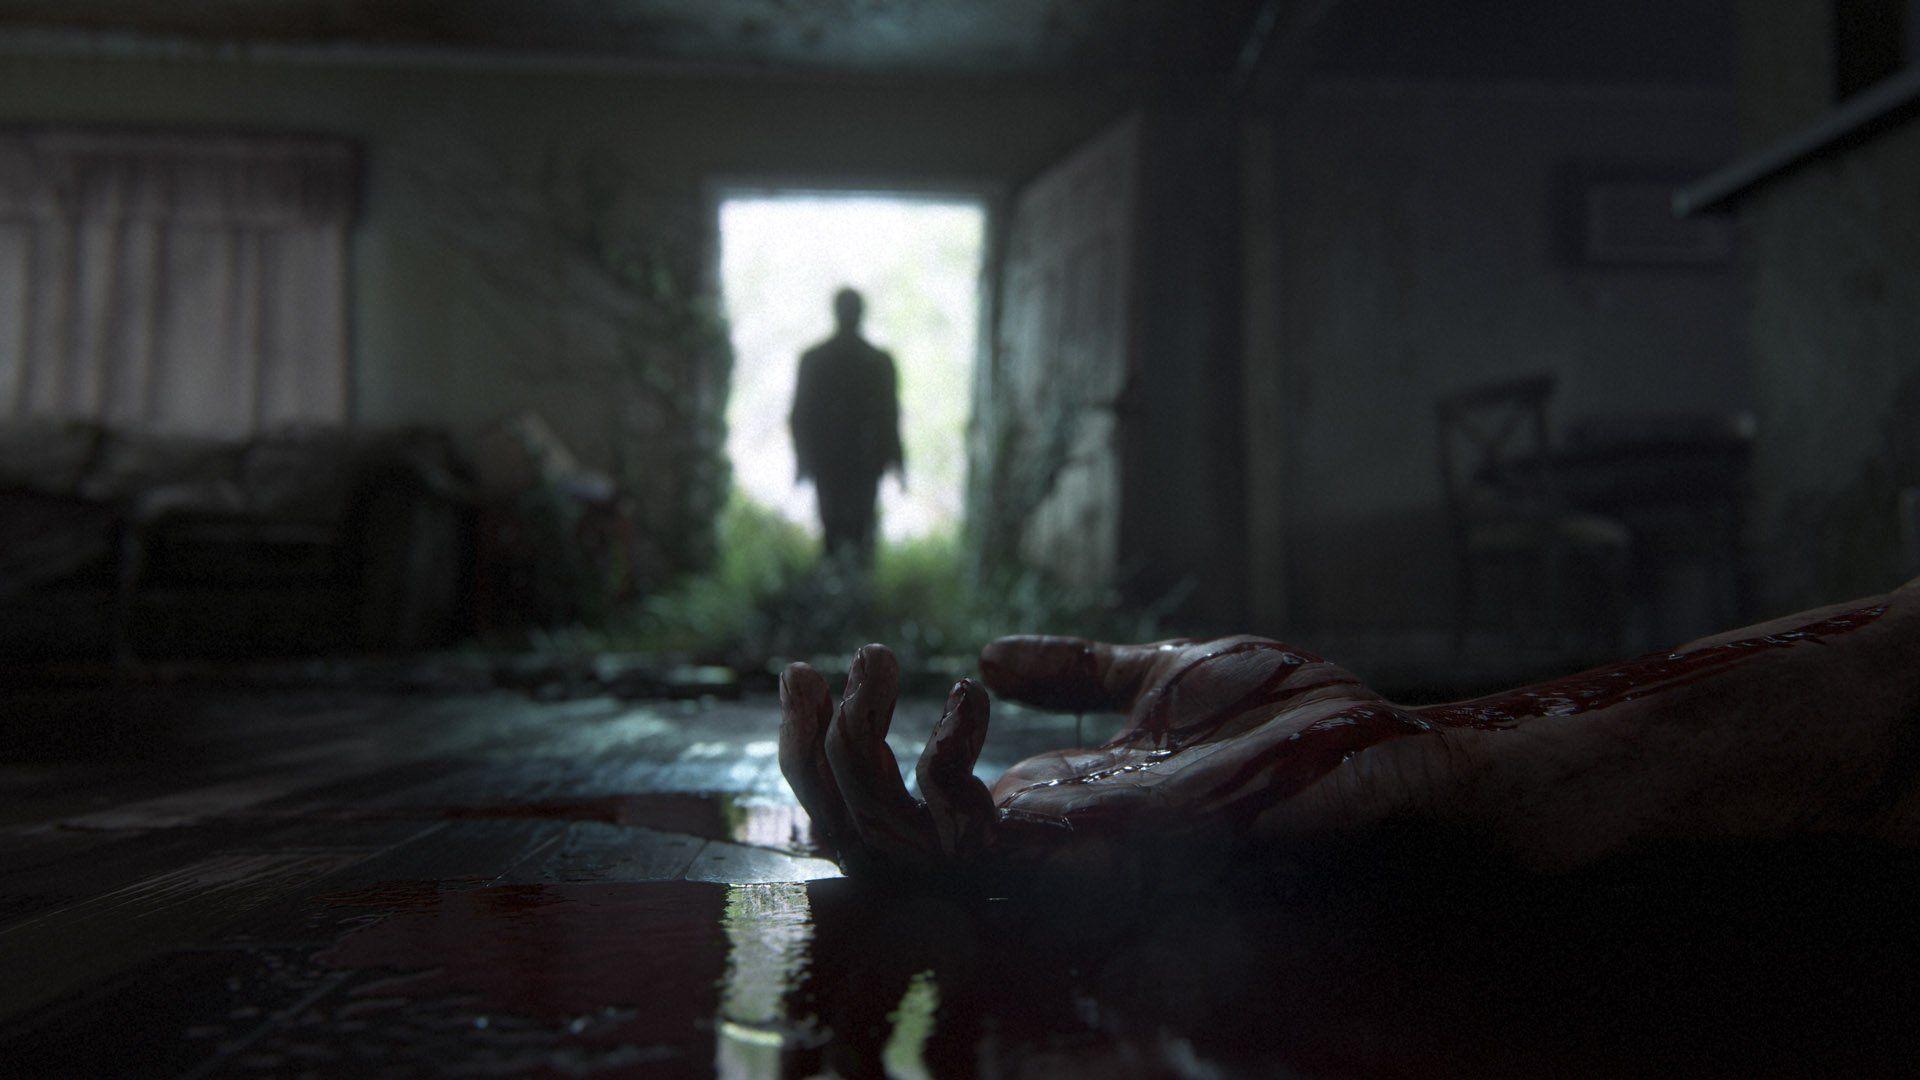 2100x1080 The Last of Us Part II Wallpaper Background Image. View